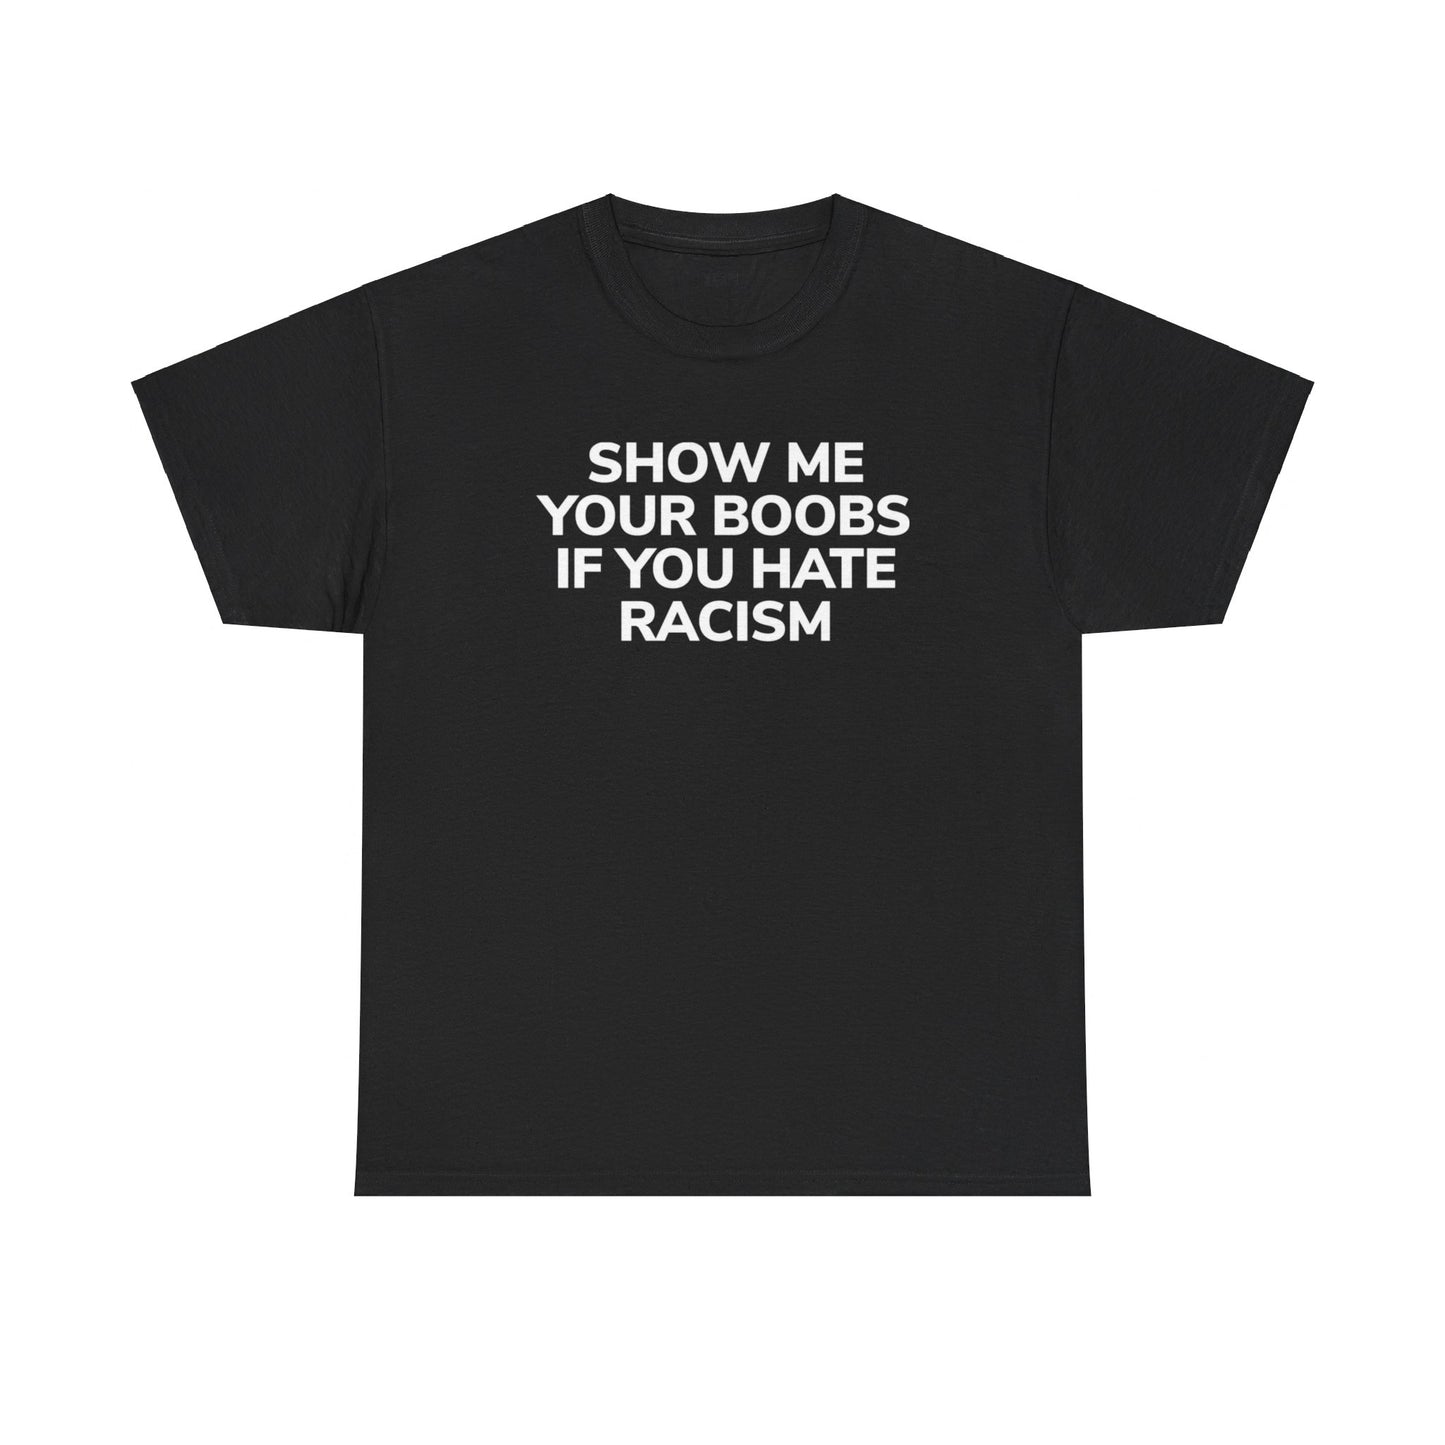 SHOW ME YOUR BOOBS IF YOU HATE RACISM (T - SHIRT)